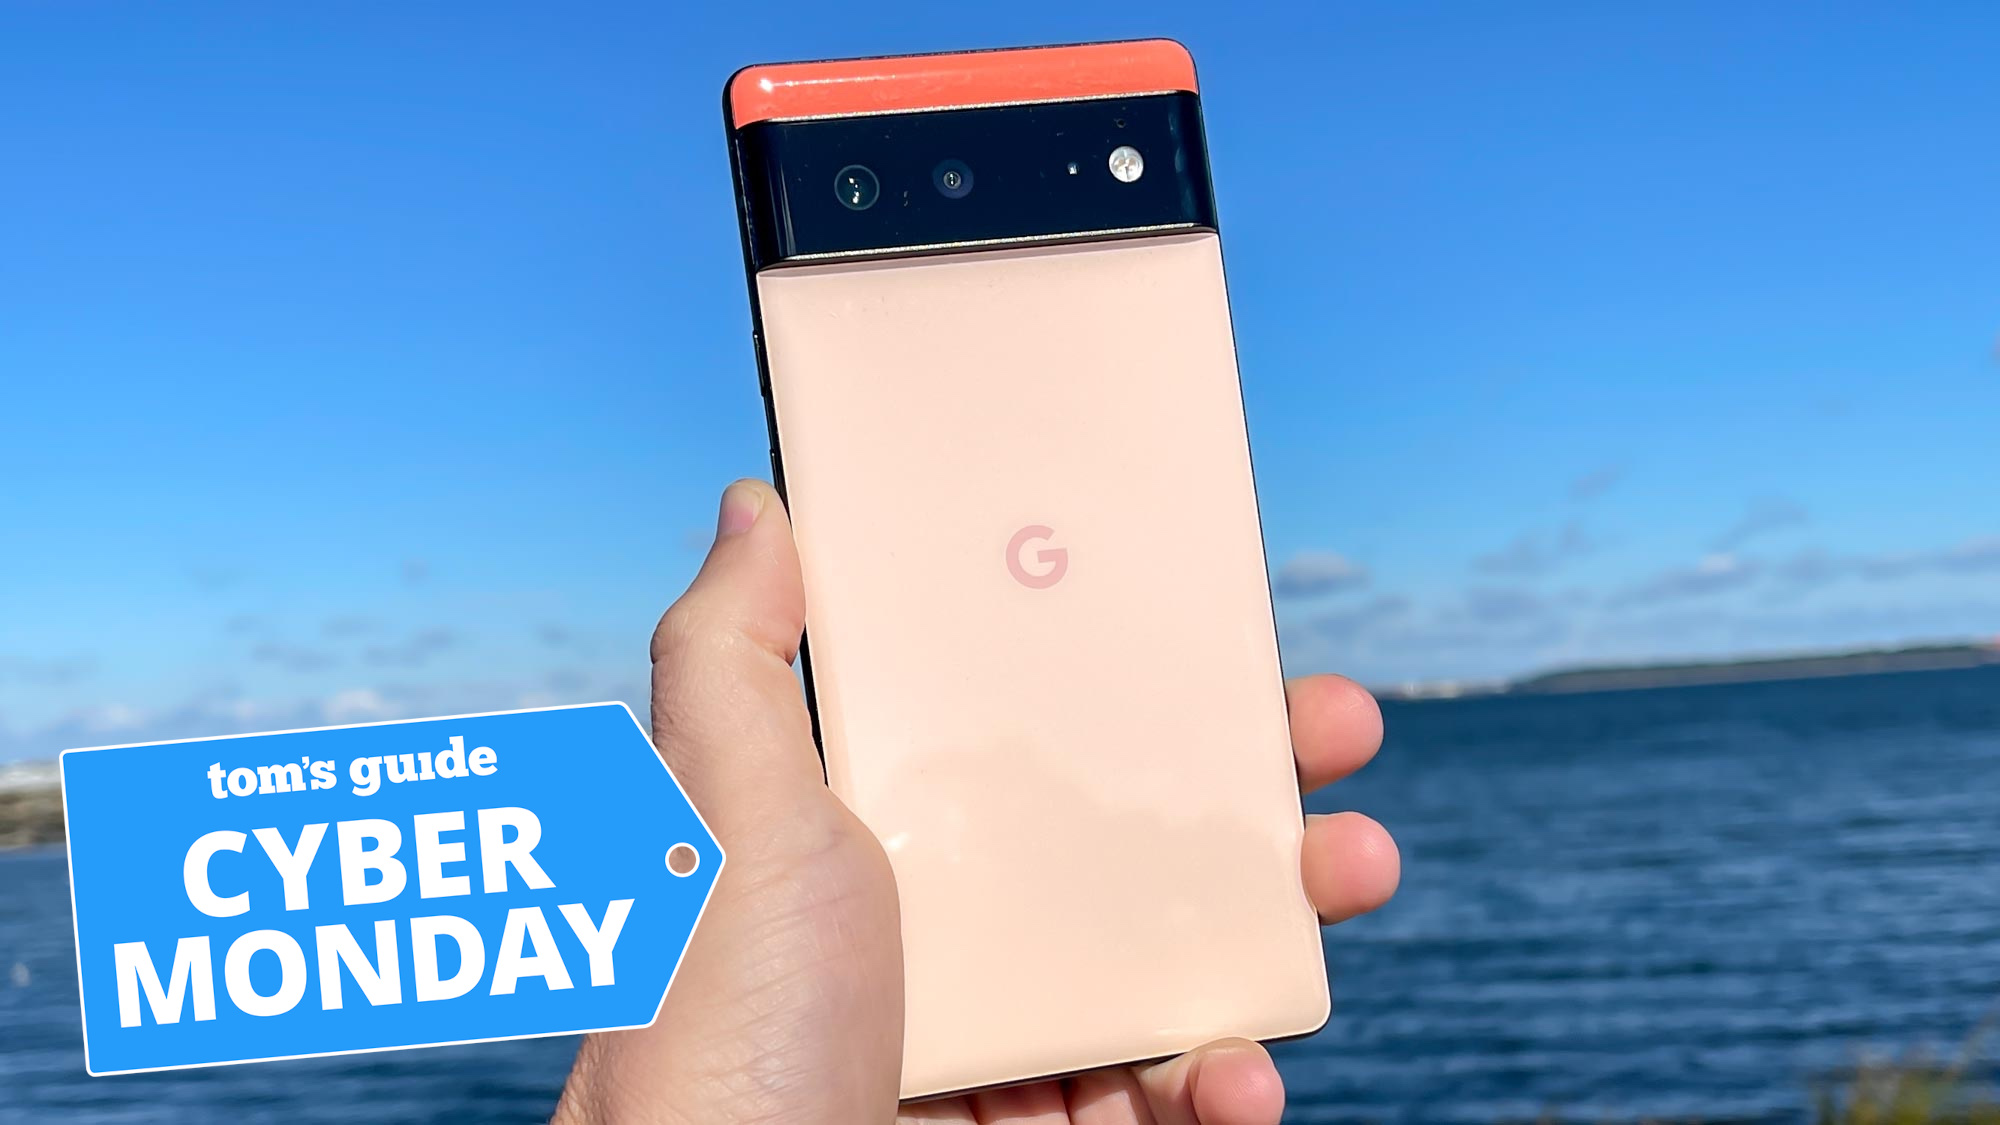 pixel 6 in kinda coral with cyber monday tag